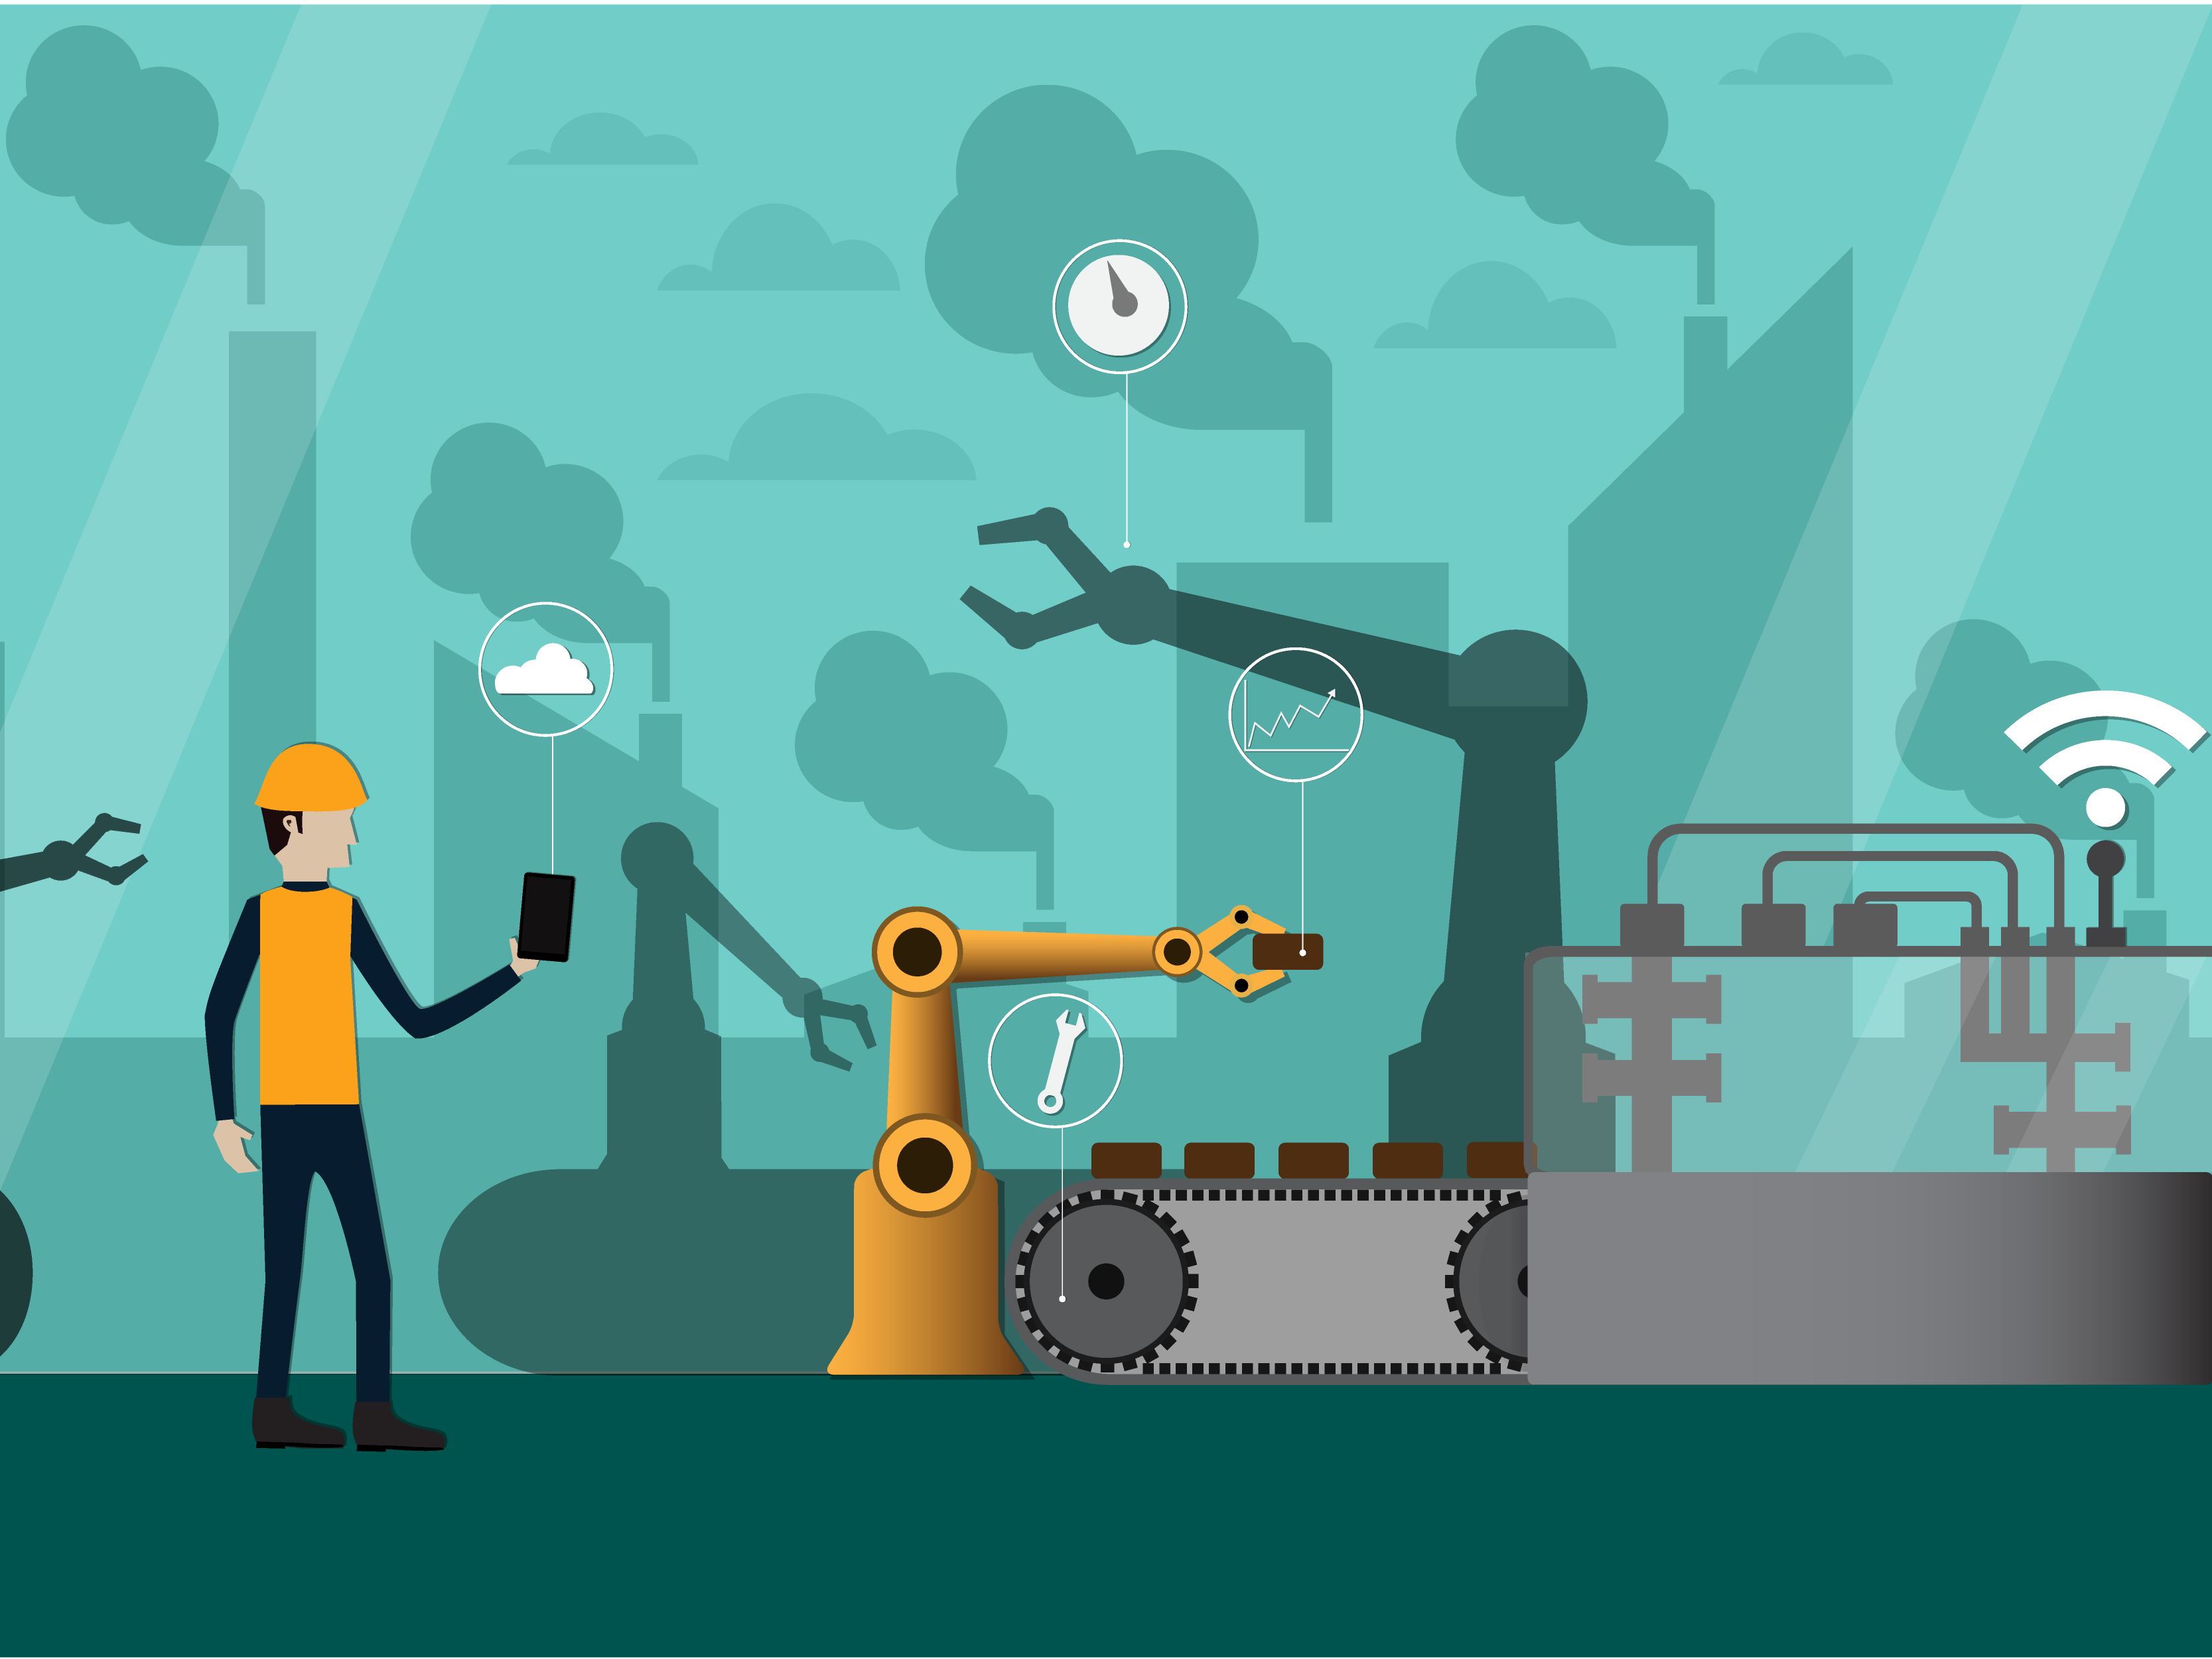 What is the meaning of IIOT technology?